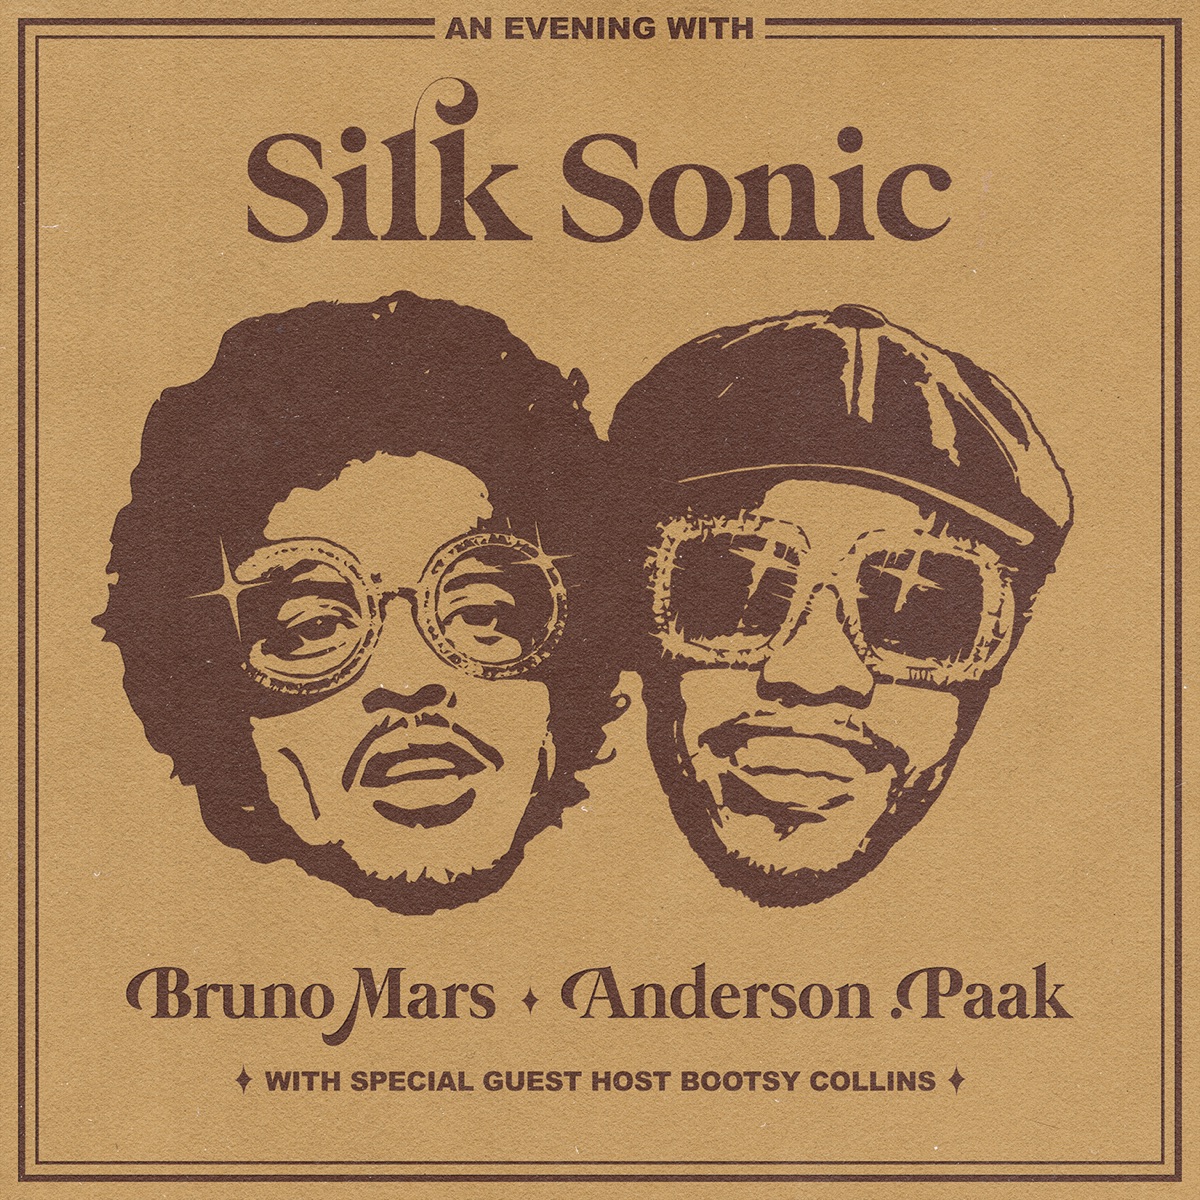 Cover for『Bruno Mars, Anderson .Paak, Silk Sonic - Skate』from the release『An Evening With Silk Sonic 』